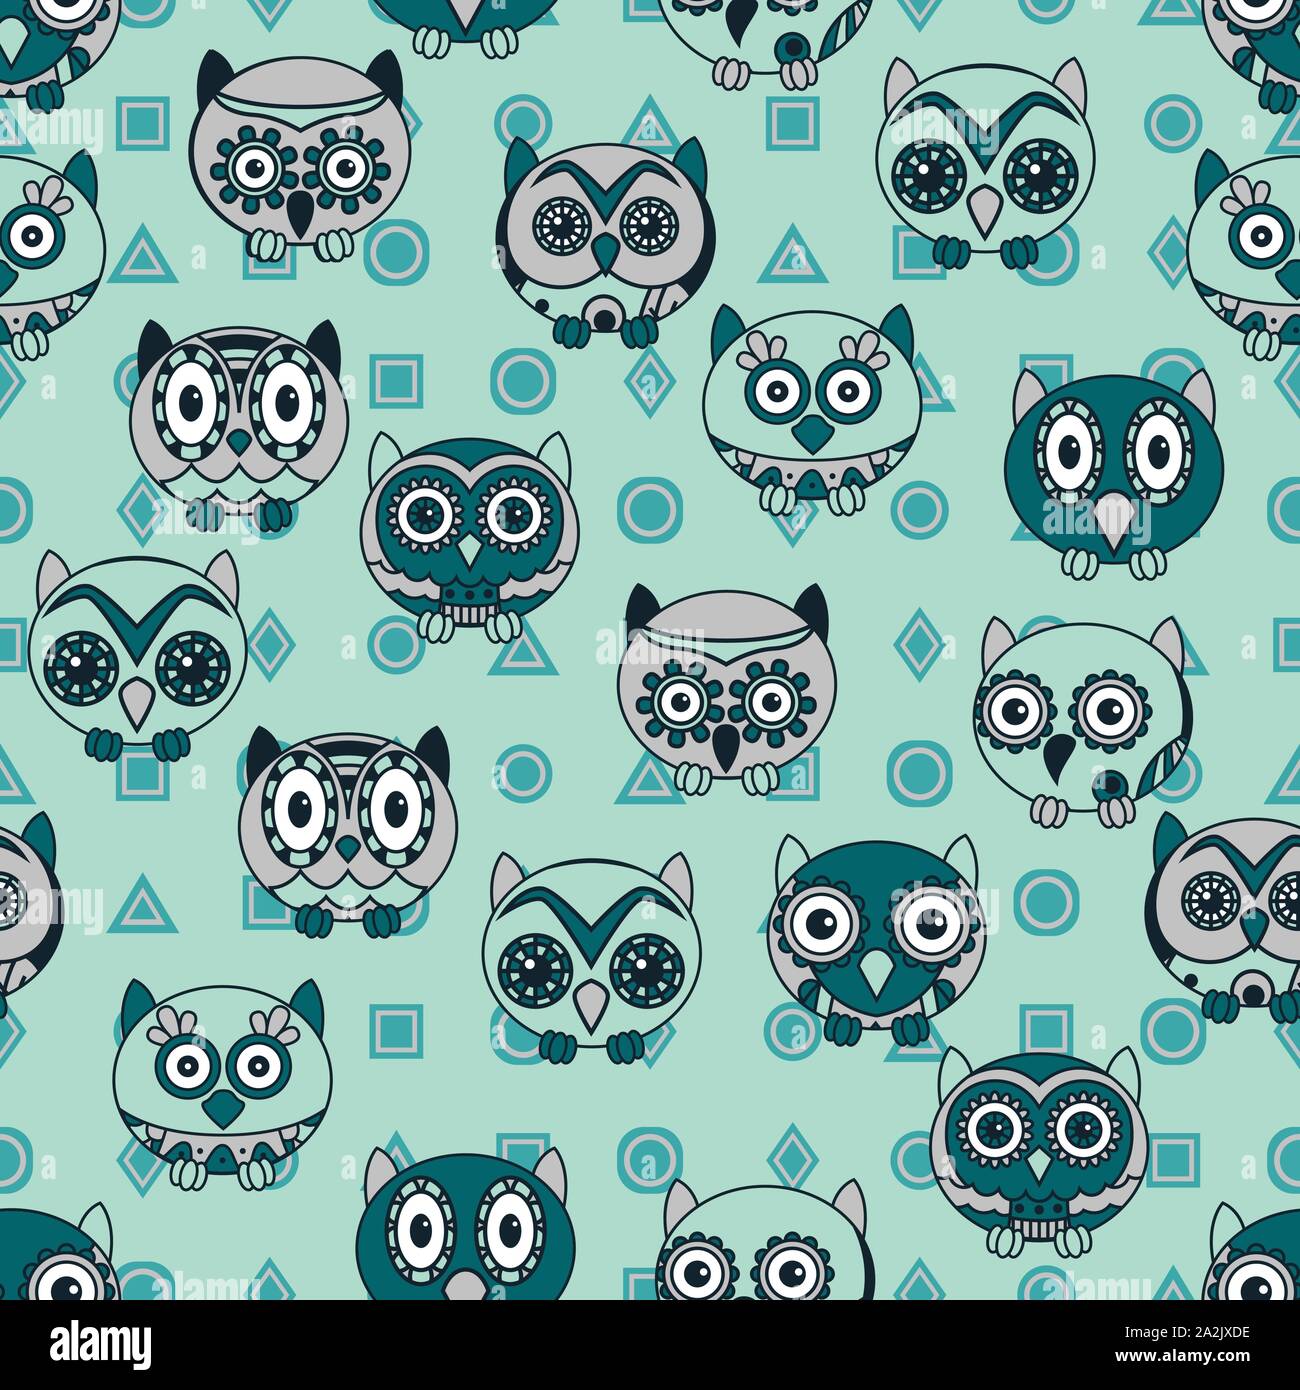 Seamless texture with cartoon owls for baby decoration in turquoise and blue hues, background can be used as a separate seamless pattern Stock Vector